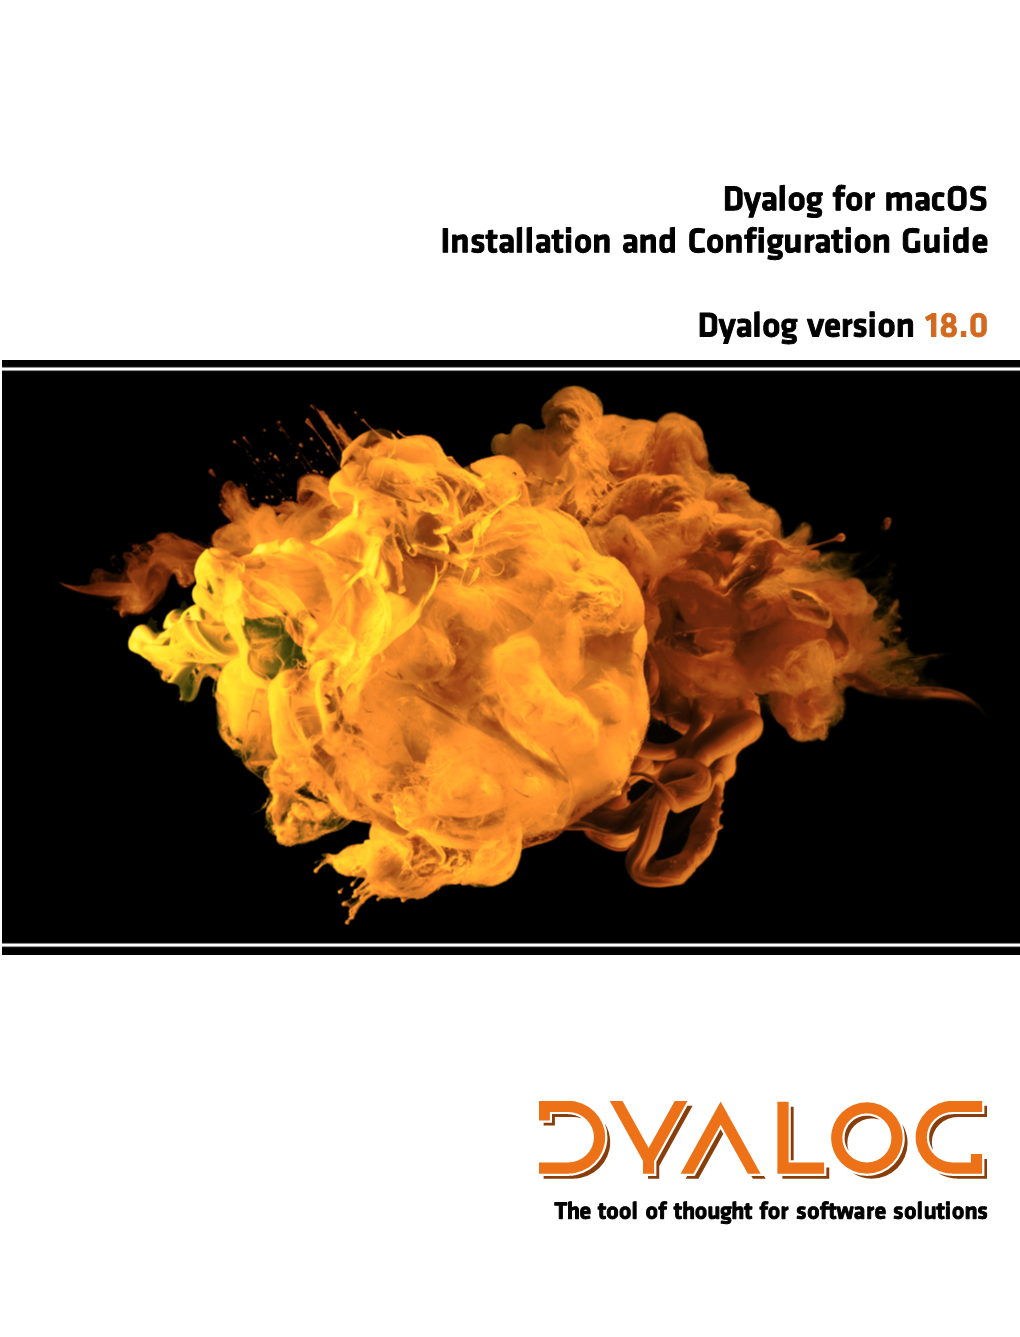 Dyalog for Macos Installation and Configuration Guide